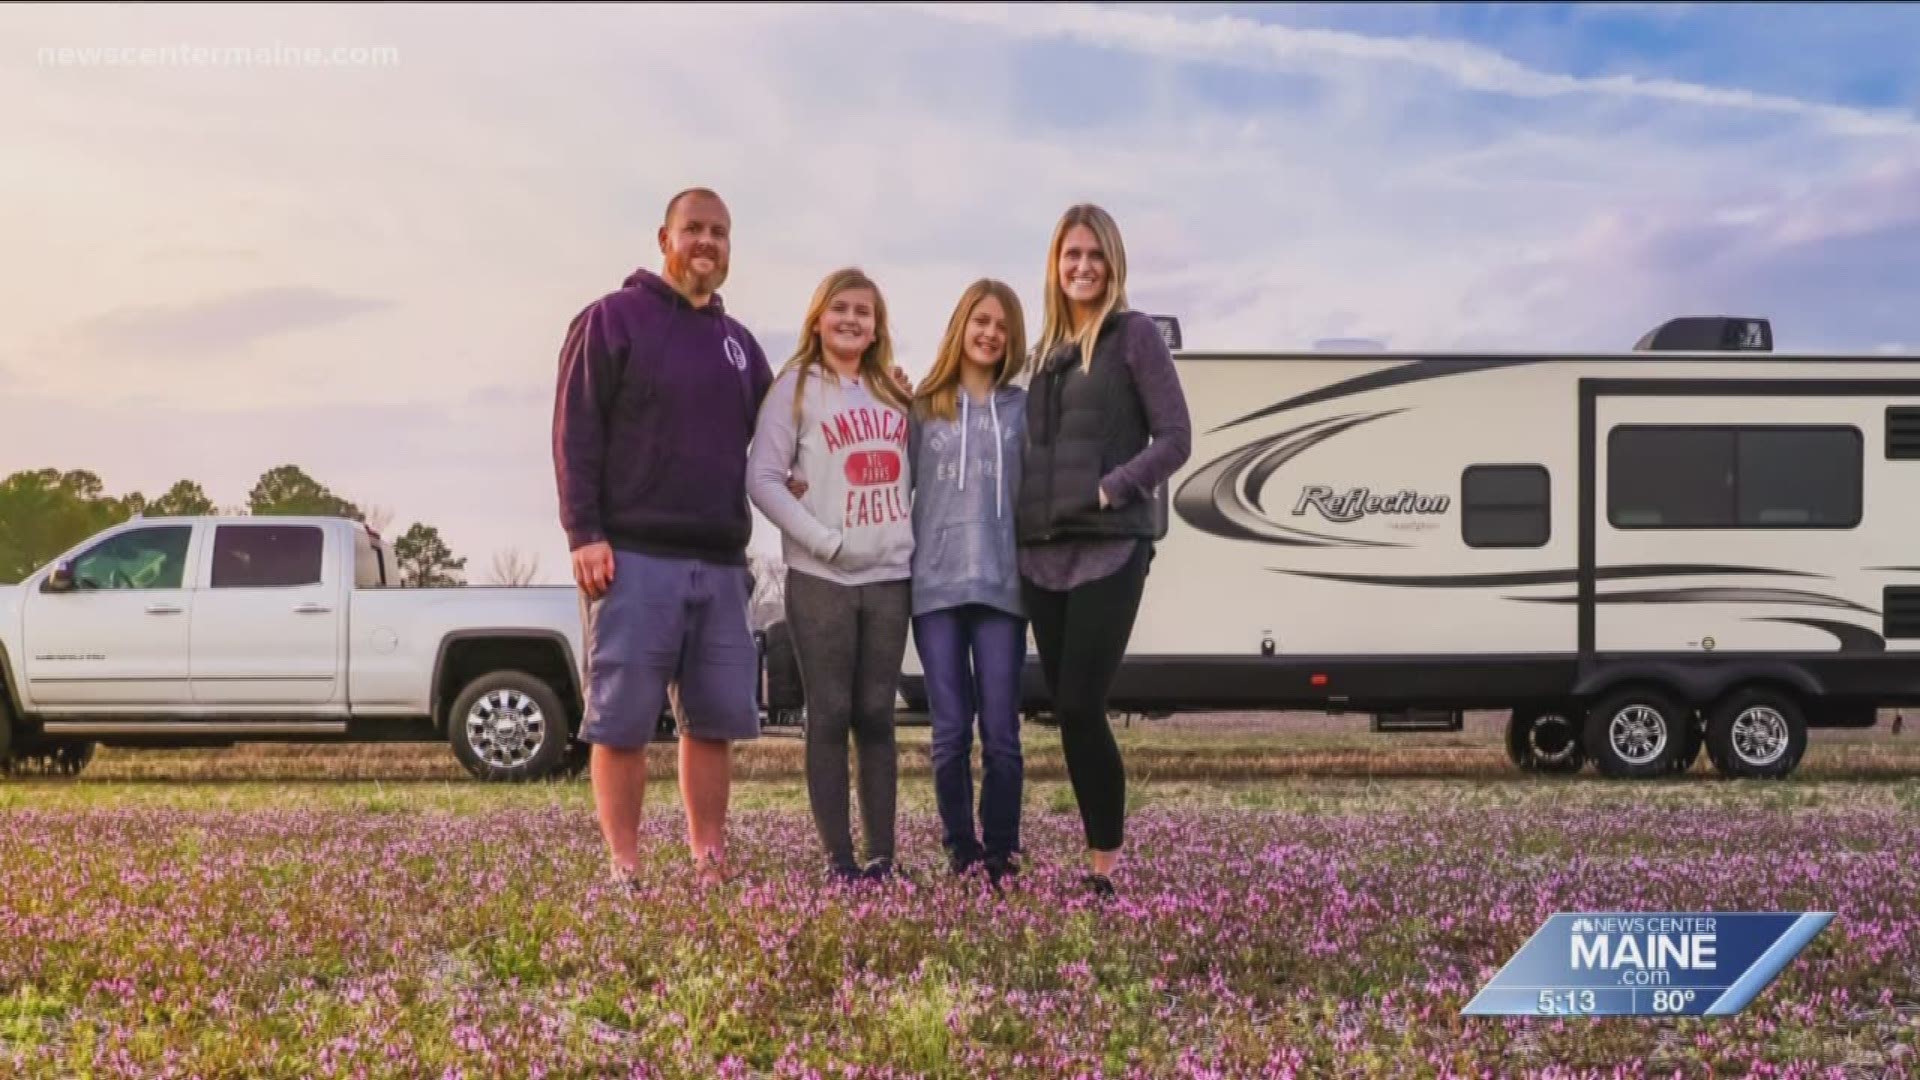 NOW: Windham family traveling country in RV